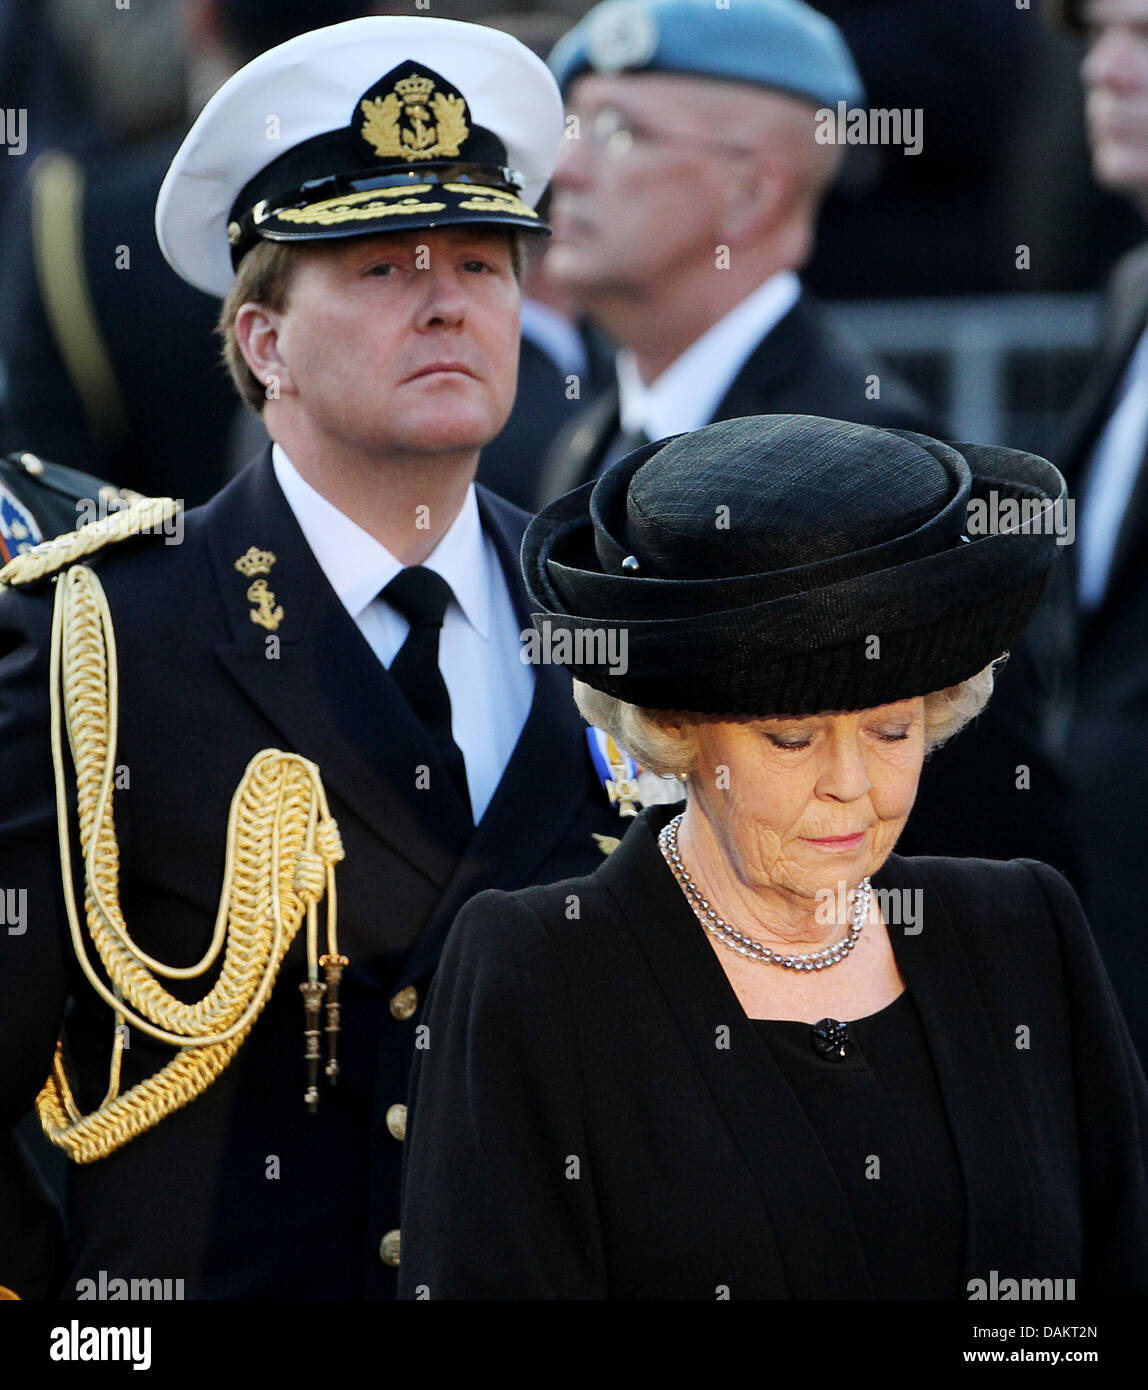 Queen Beatrix of The Netherlands and Crown Prince Willem-Alexander attend the National Remembrance Day ceremony to commemorate the victims of World War II at the Dam square in Amsterdam, The Netherlands, 4 May 2011.Photo: Patrick van Katwijk NETHERLANDS OUT Stock Photo